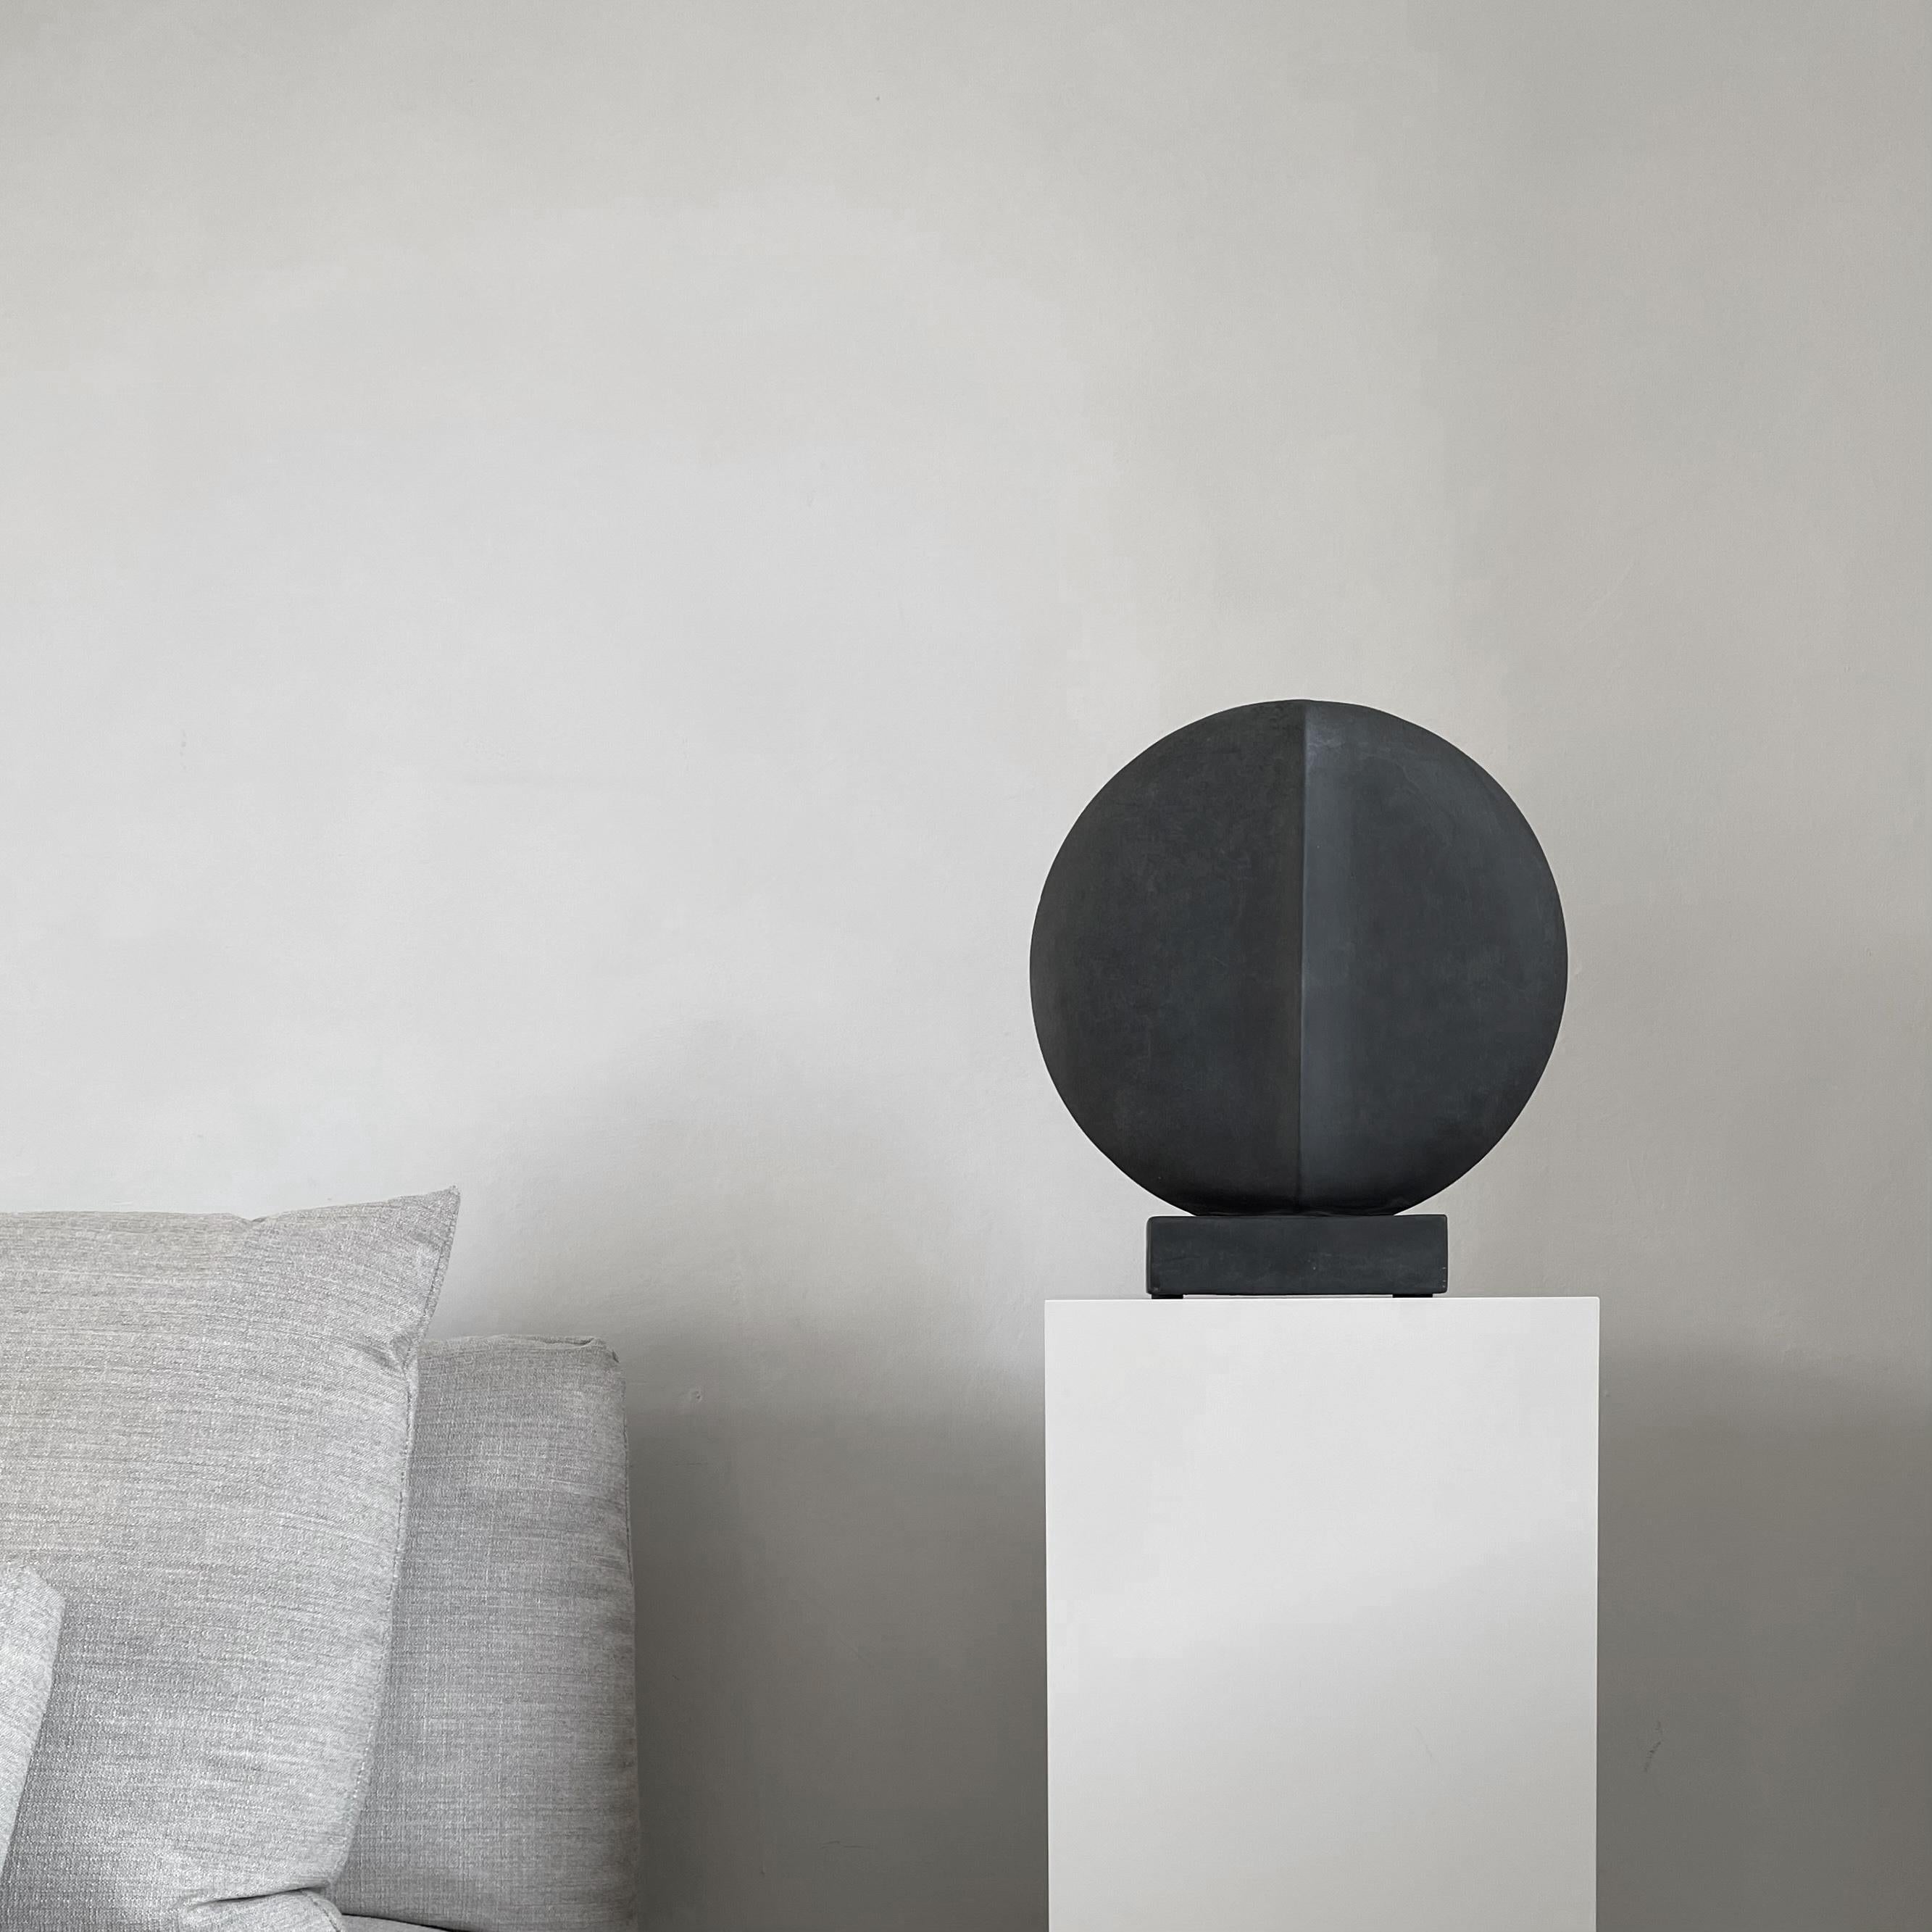 A set of 2 black Guggenheim mini by 101 Copenhagen
Designed by Kristian Sofus Hansen & Tommy Hyldahl
Dimensions: L 32 / W 7 / H 34 CM
Materials: Ceramic

Guggenheim is a series of sculptural ceramic vases based on archetypal geometry. The